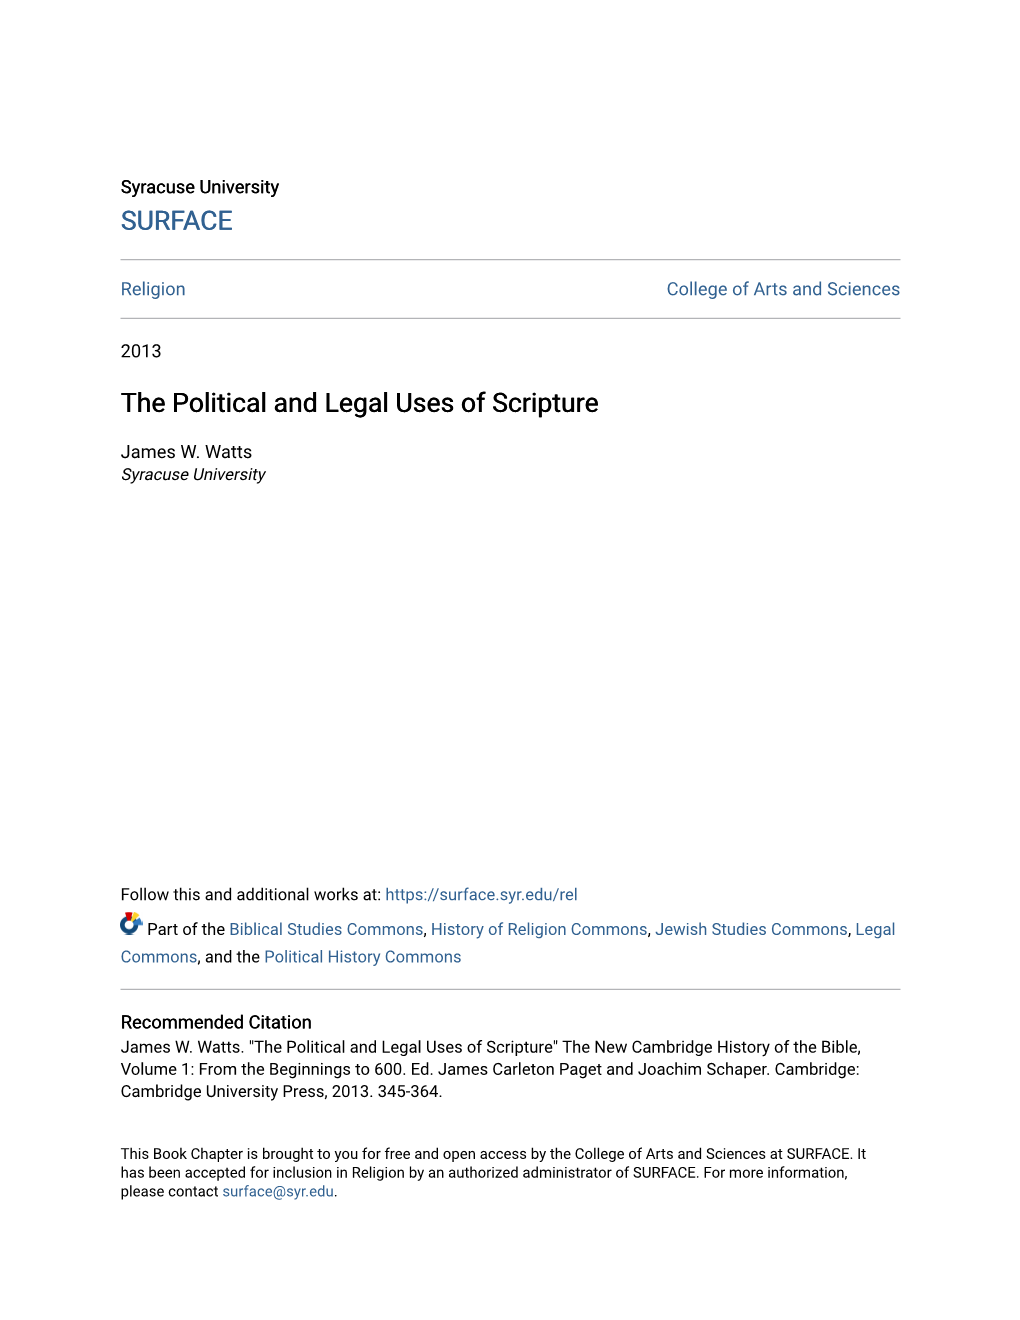 The Political and Legal Uses of Scripture